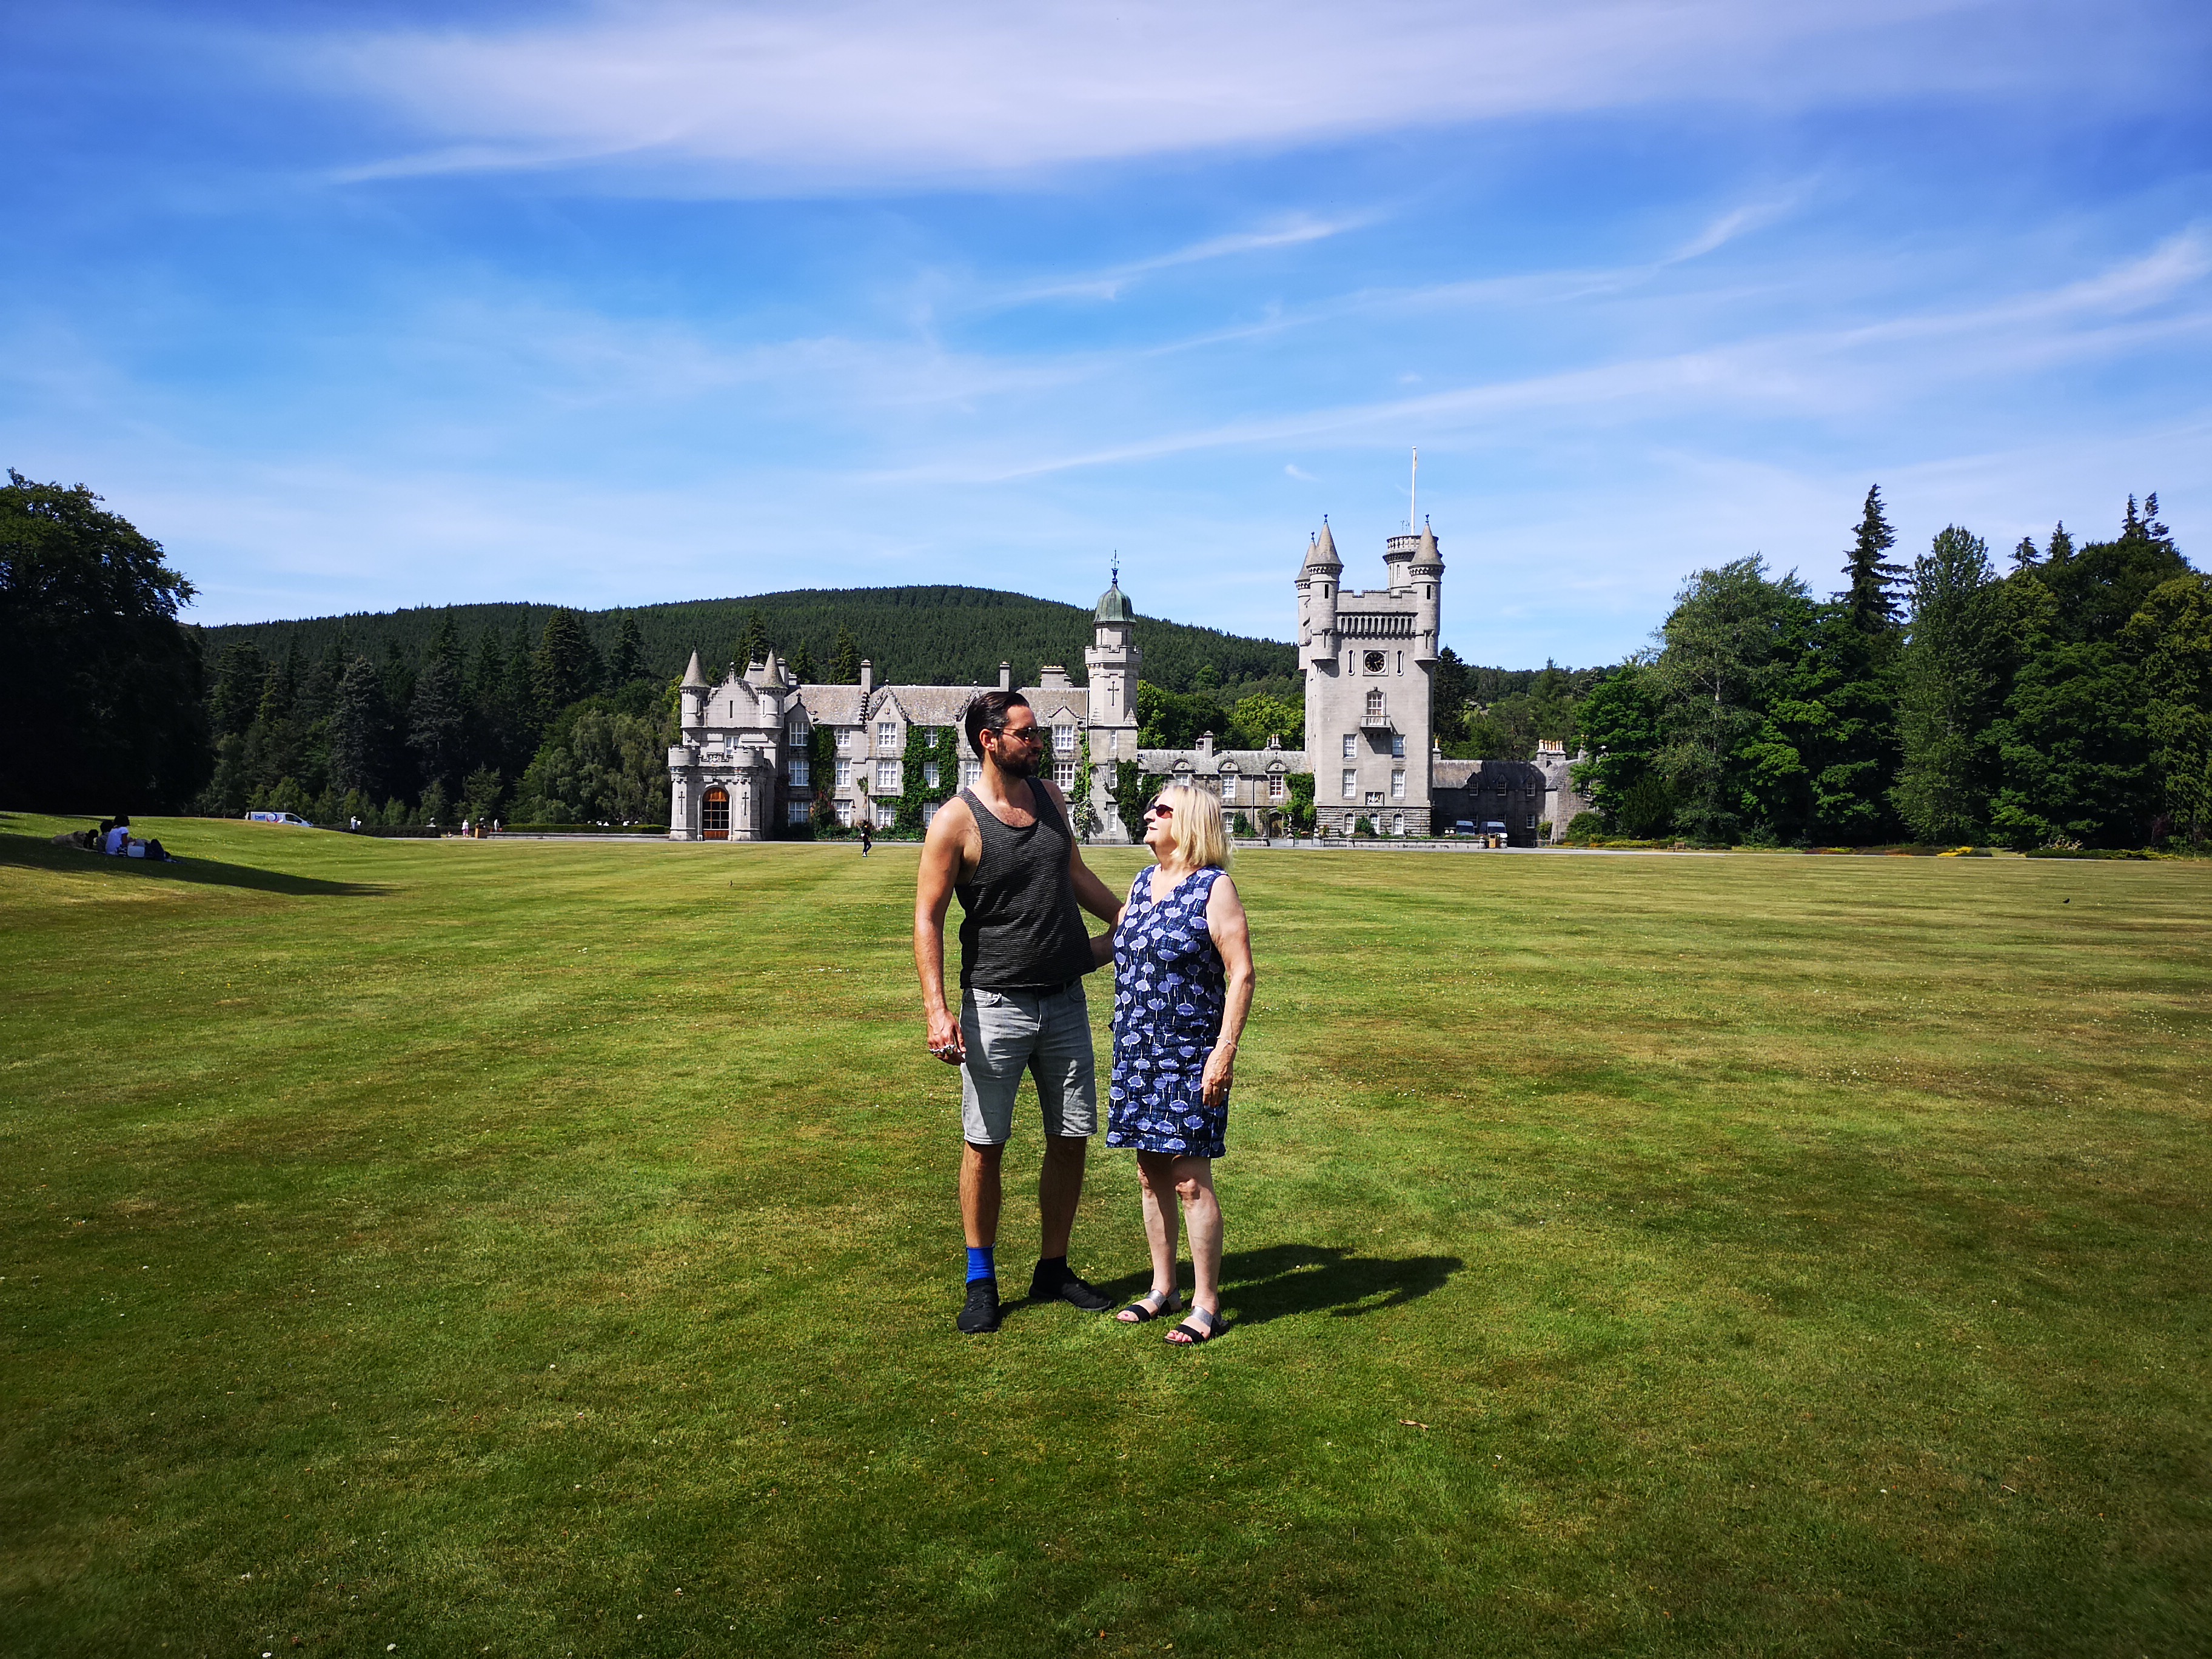 Visiting the Royal Family's Balmoral Castle in Scotland